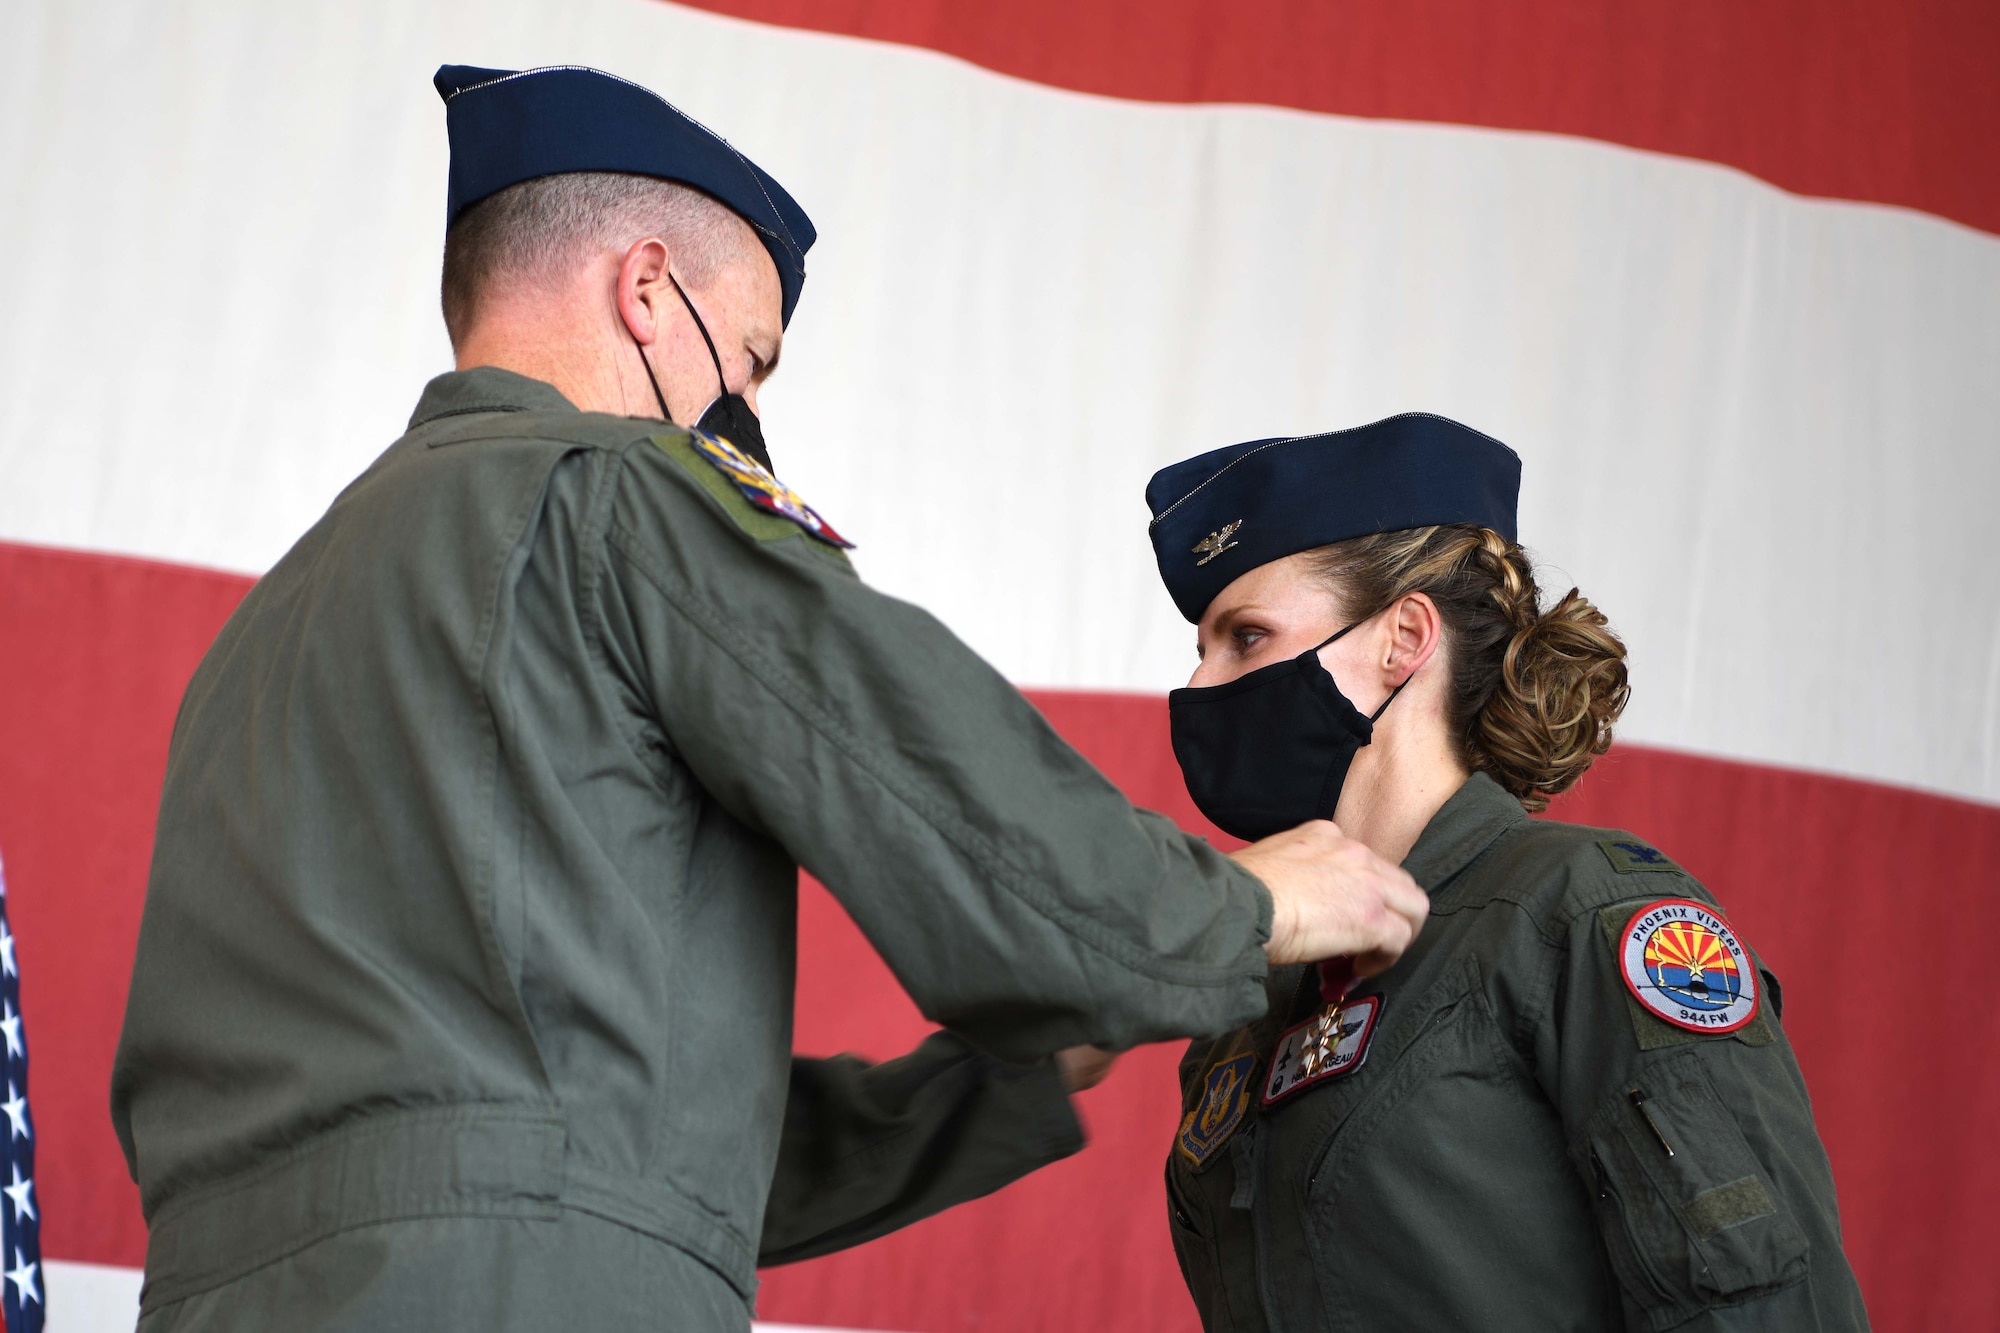 LUKE AIR FORCE BASE, ARIZ. – Reserve Citizen Airman Col. Mark Van Brunt, 944th Fighter Wing commander, presents Reserve Citizen Airman Col. Trena Savageau the Legion of Merit for her performance as the 944th Fighter Group commander at the change of command ceremony, August 6, 2021, at Luke Air Force Base. Savageau was responsible for training F-16 Fighting Falcon and F-35 Lightning II pilots in three squadrons and two geographically separated locations to meet the requirements of combat air forces. (U.S. Air Force Photo/Tech. Sgt. Courtney Richardson)